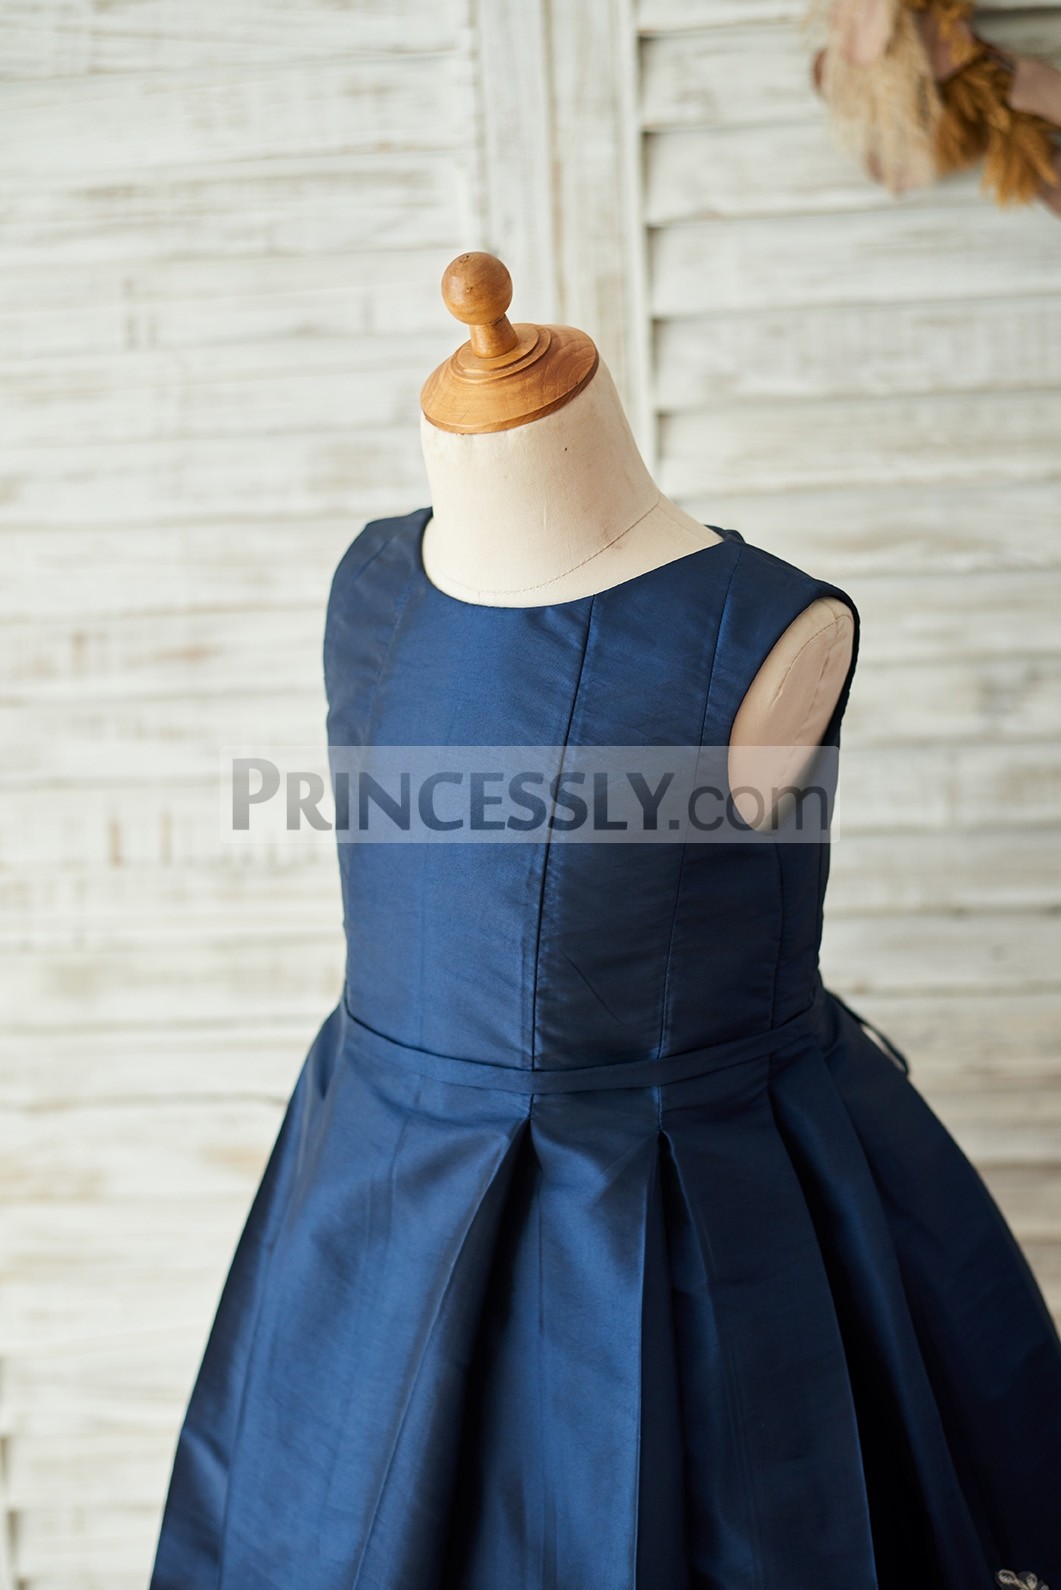 Seamed lines bodice with thin sash